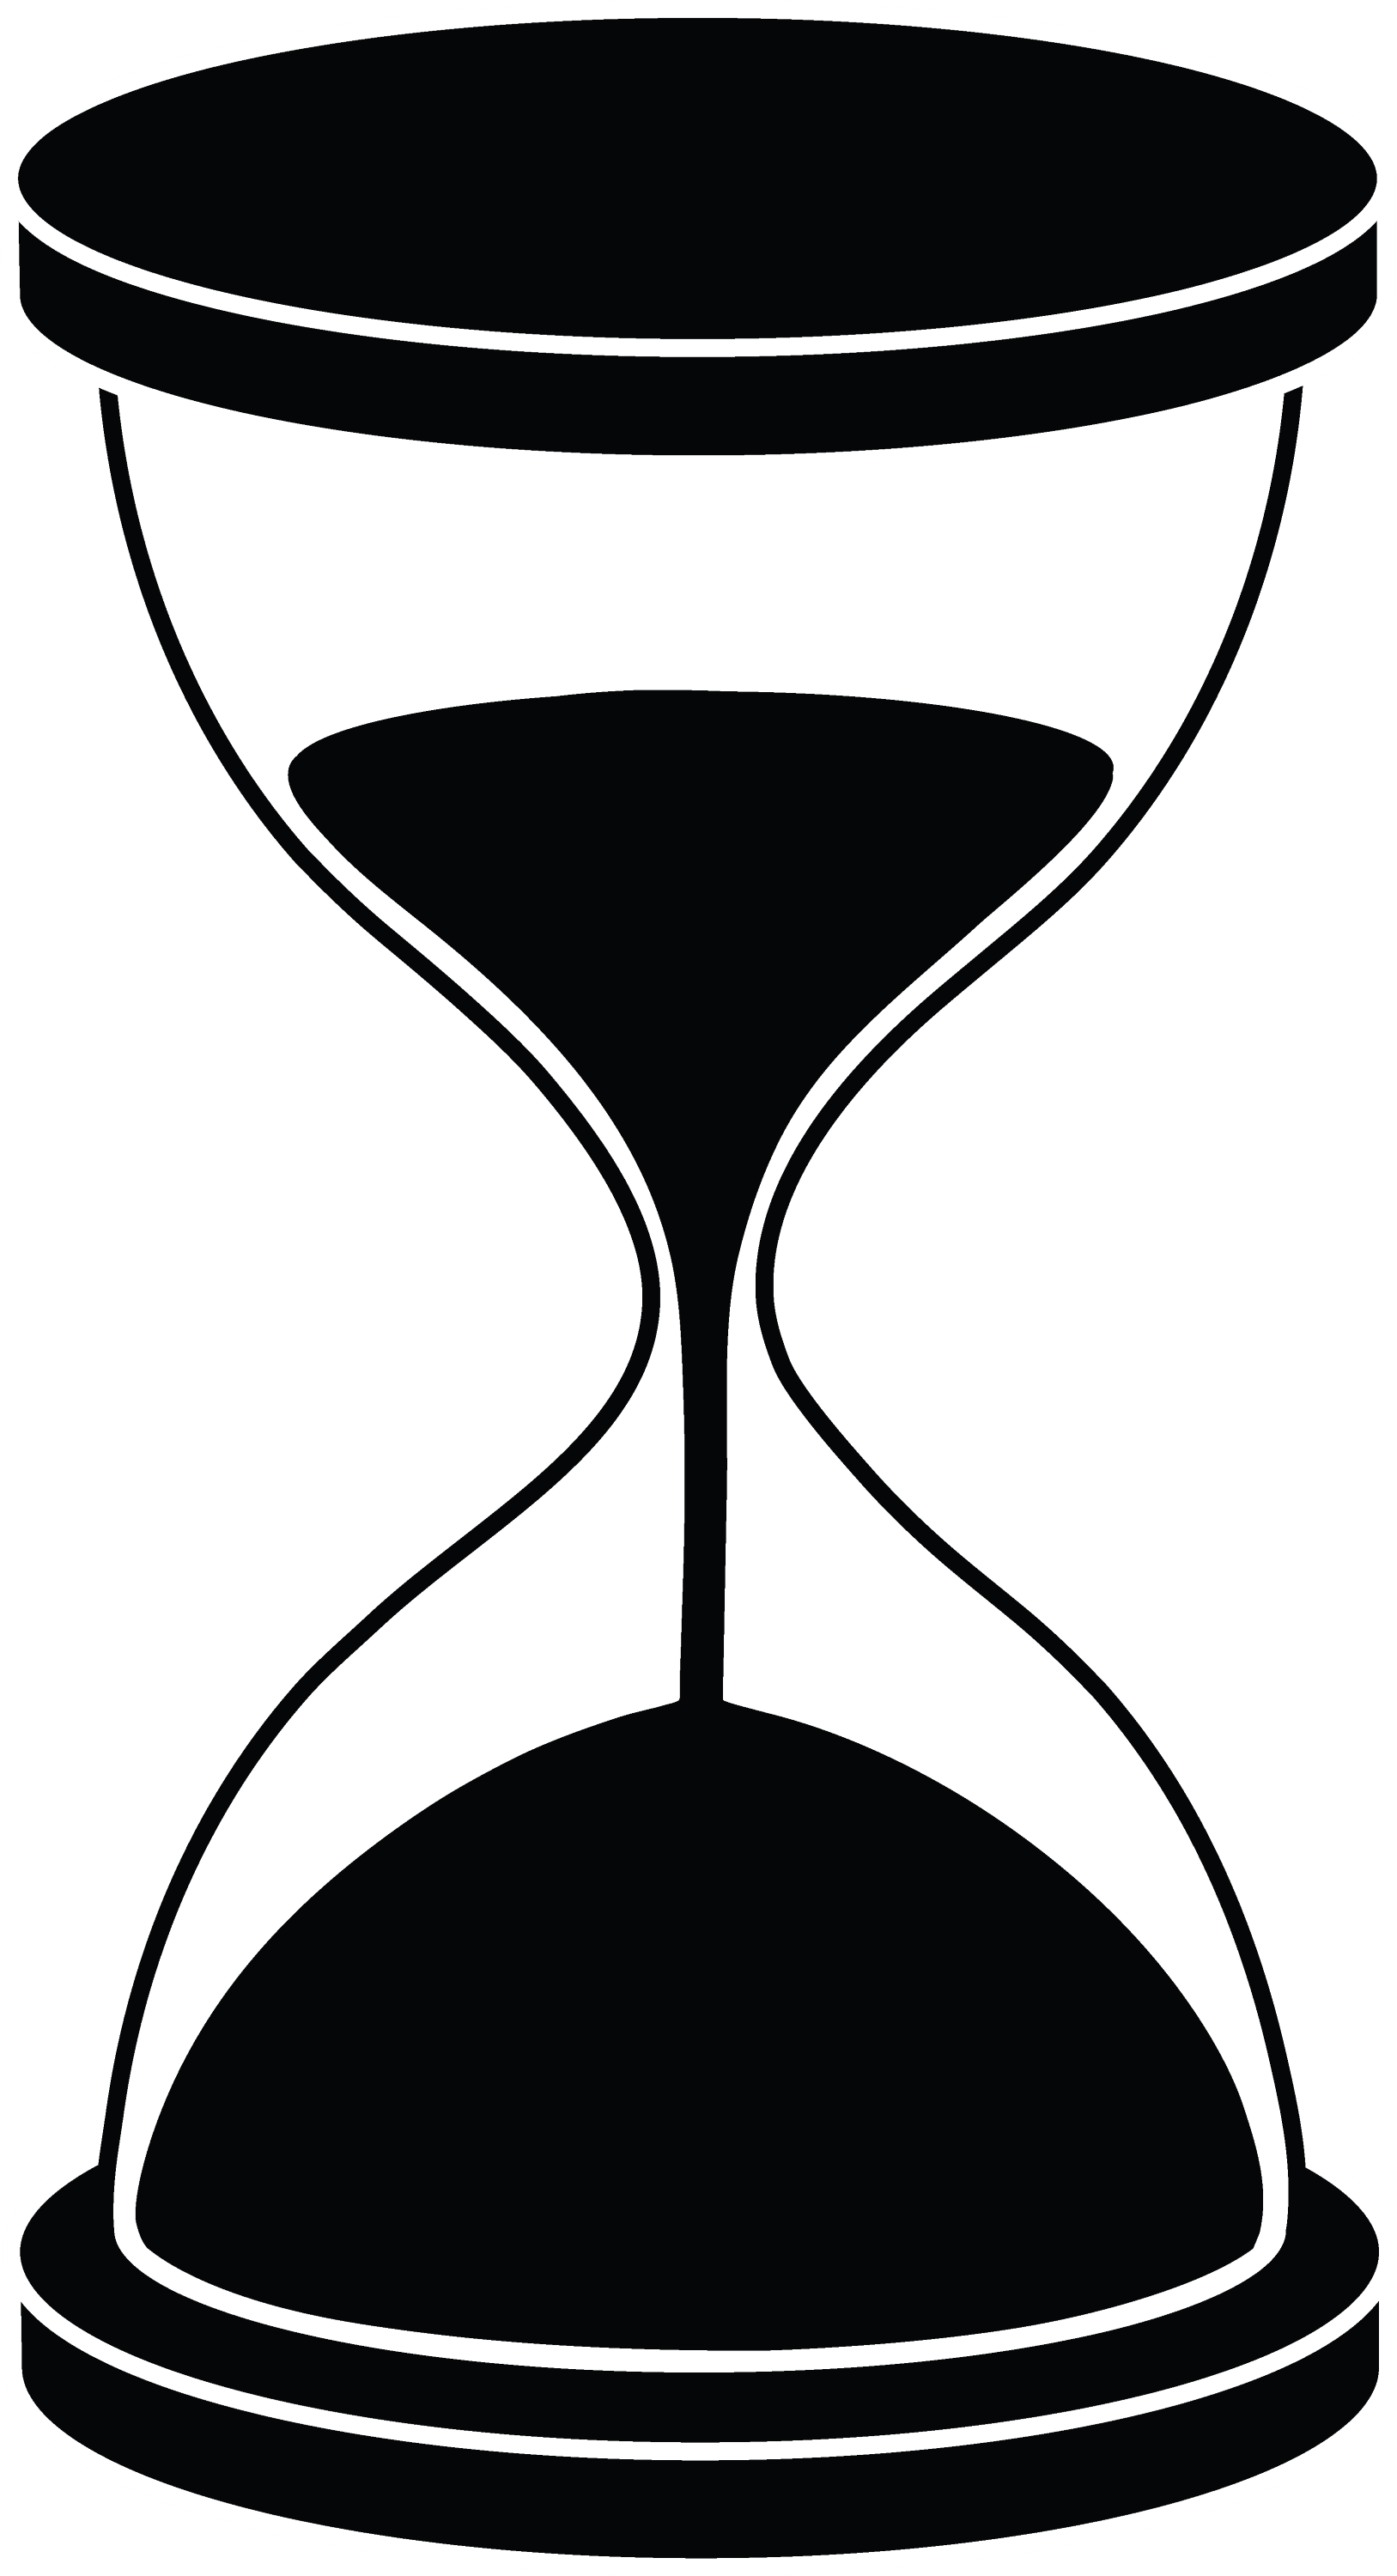 hourglass_silhouette.png